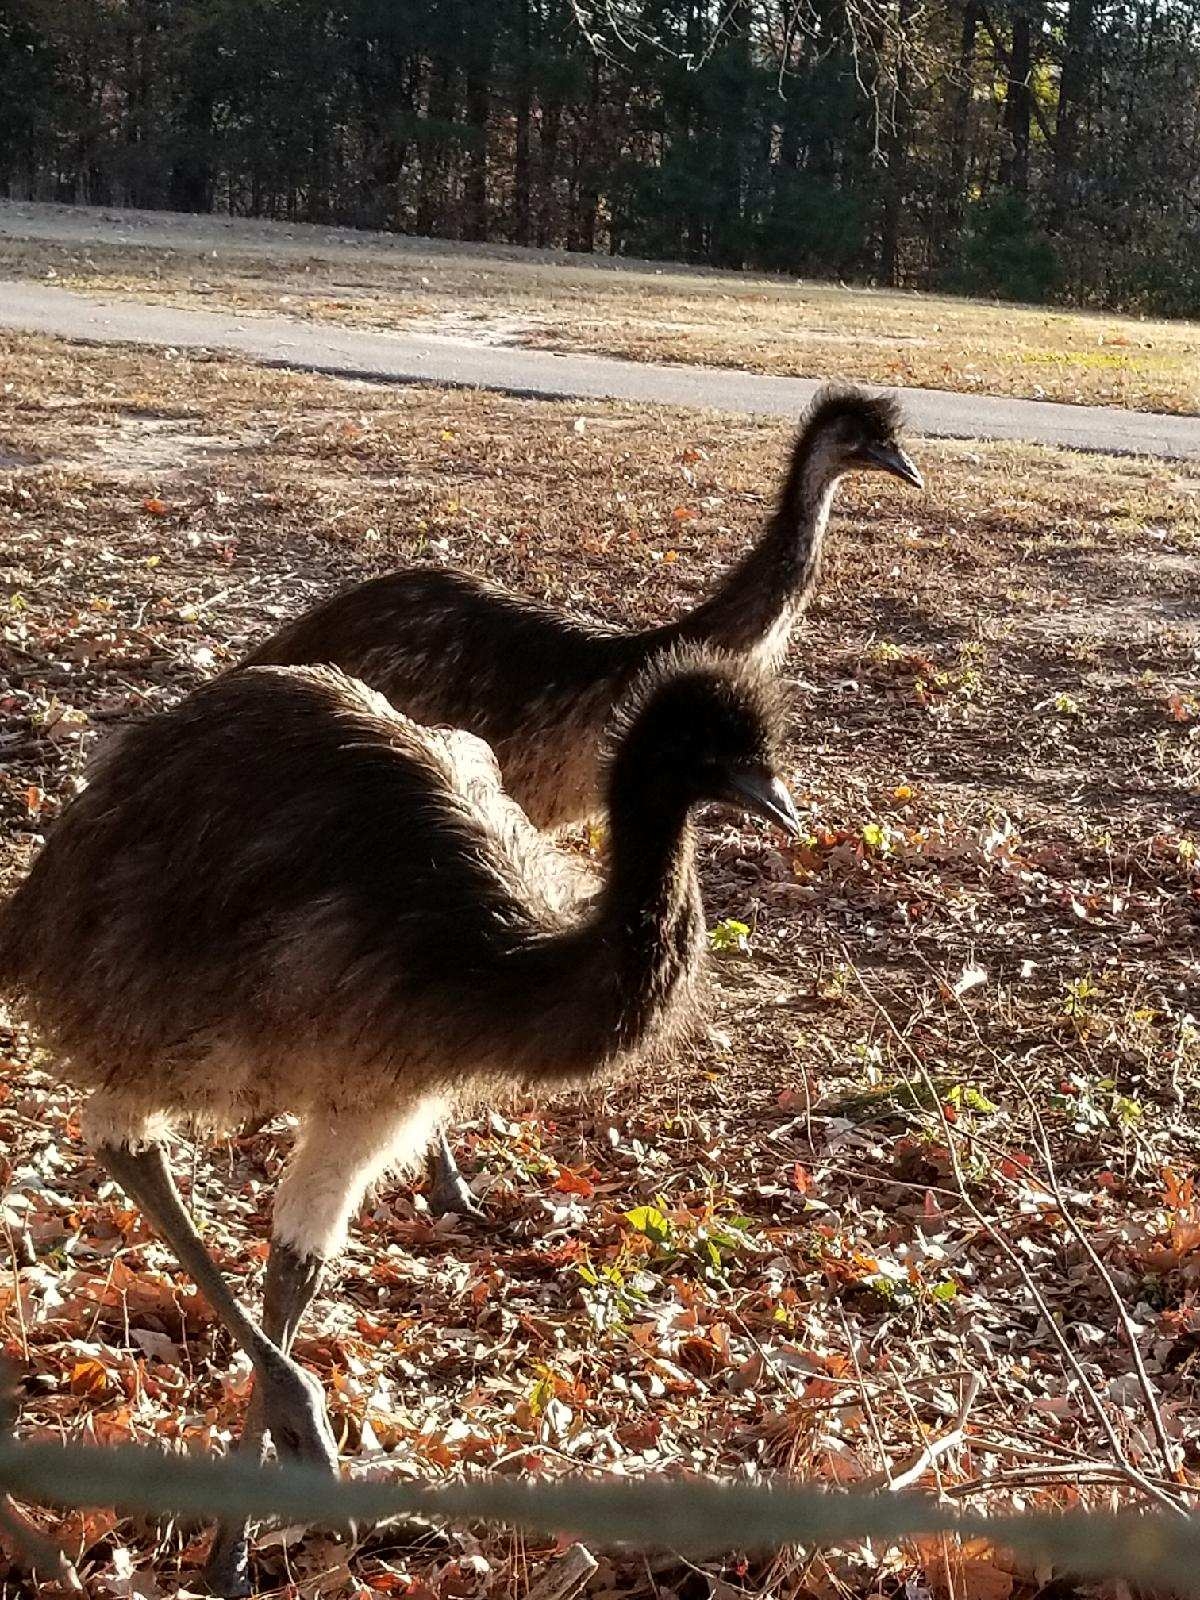 Two emus on the farm